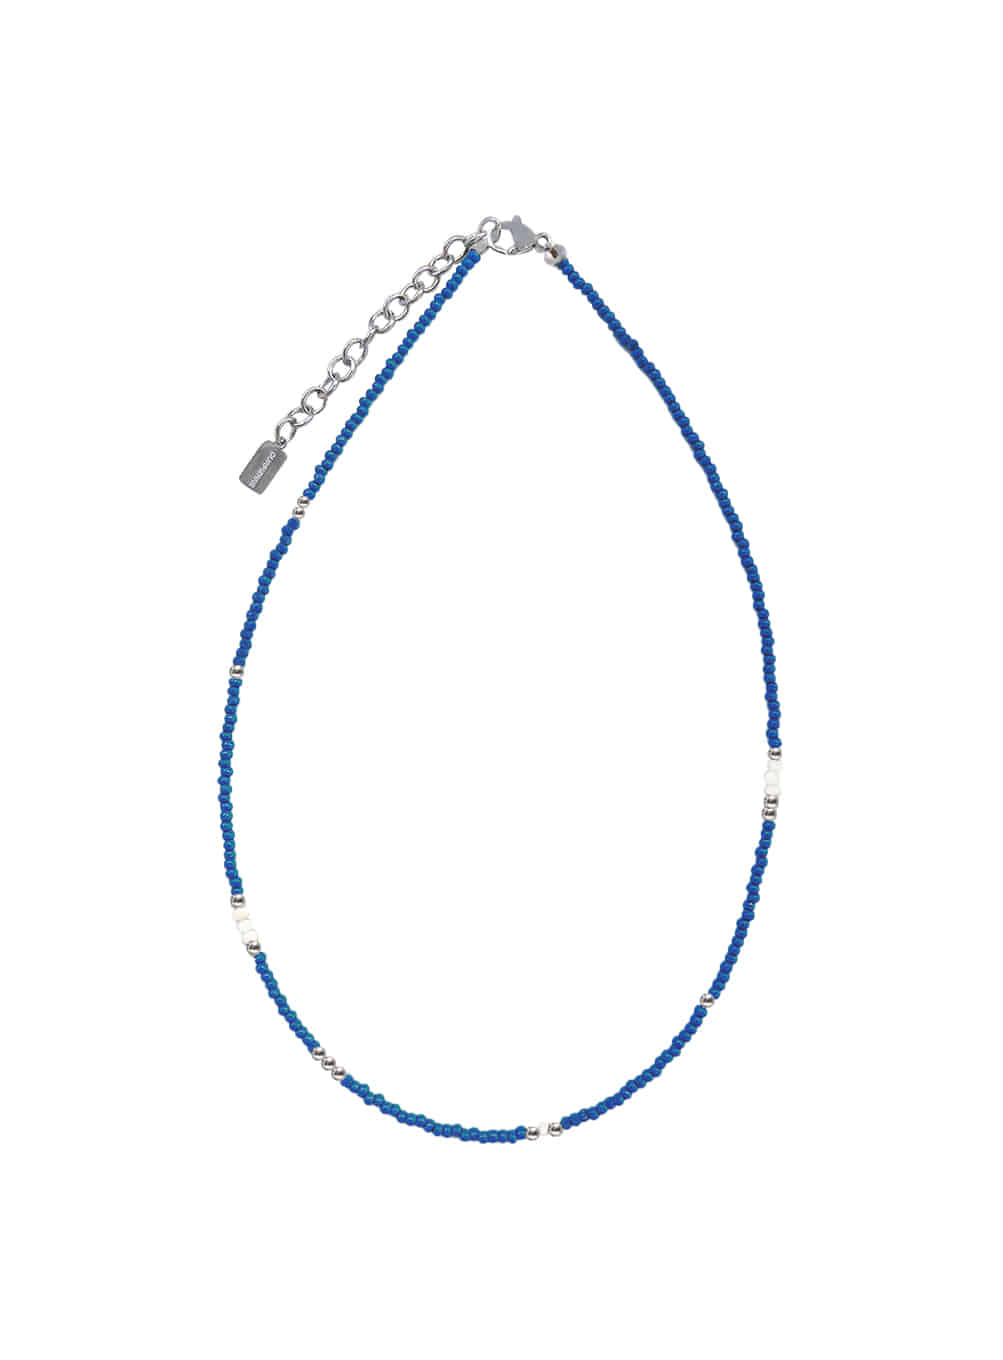 LOVE SKINNY BEADS NECKLACE (BLUE)